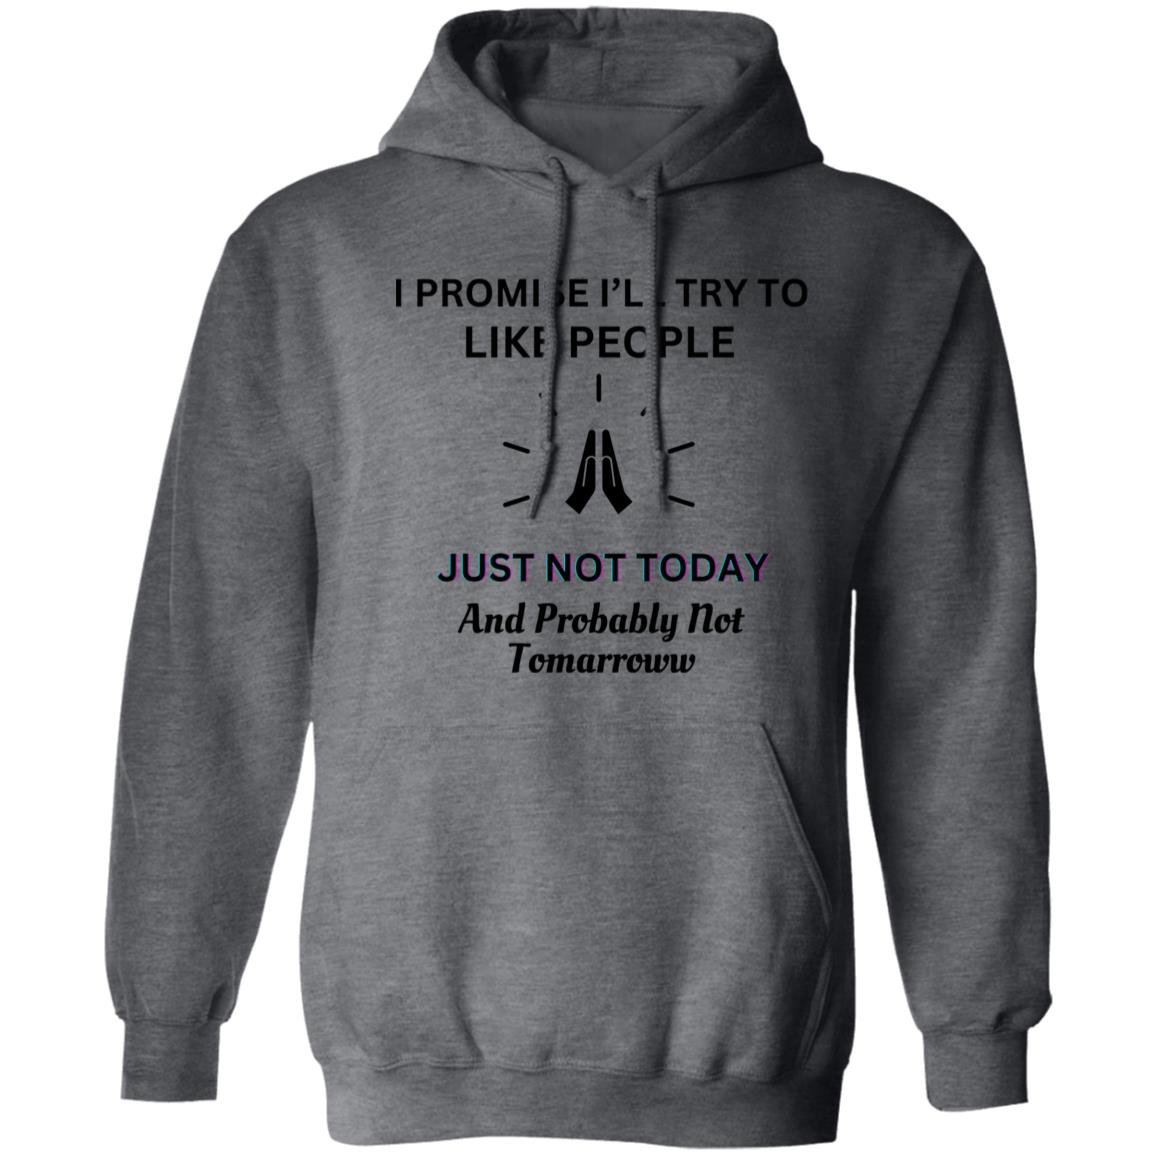 I PROMISE I'LL TRY TO LIKE PEOPLE... (UNISEX) HOODIE